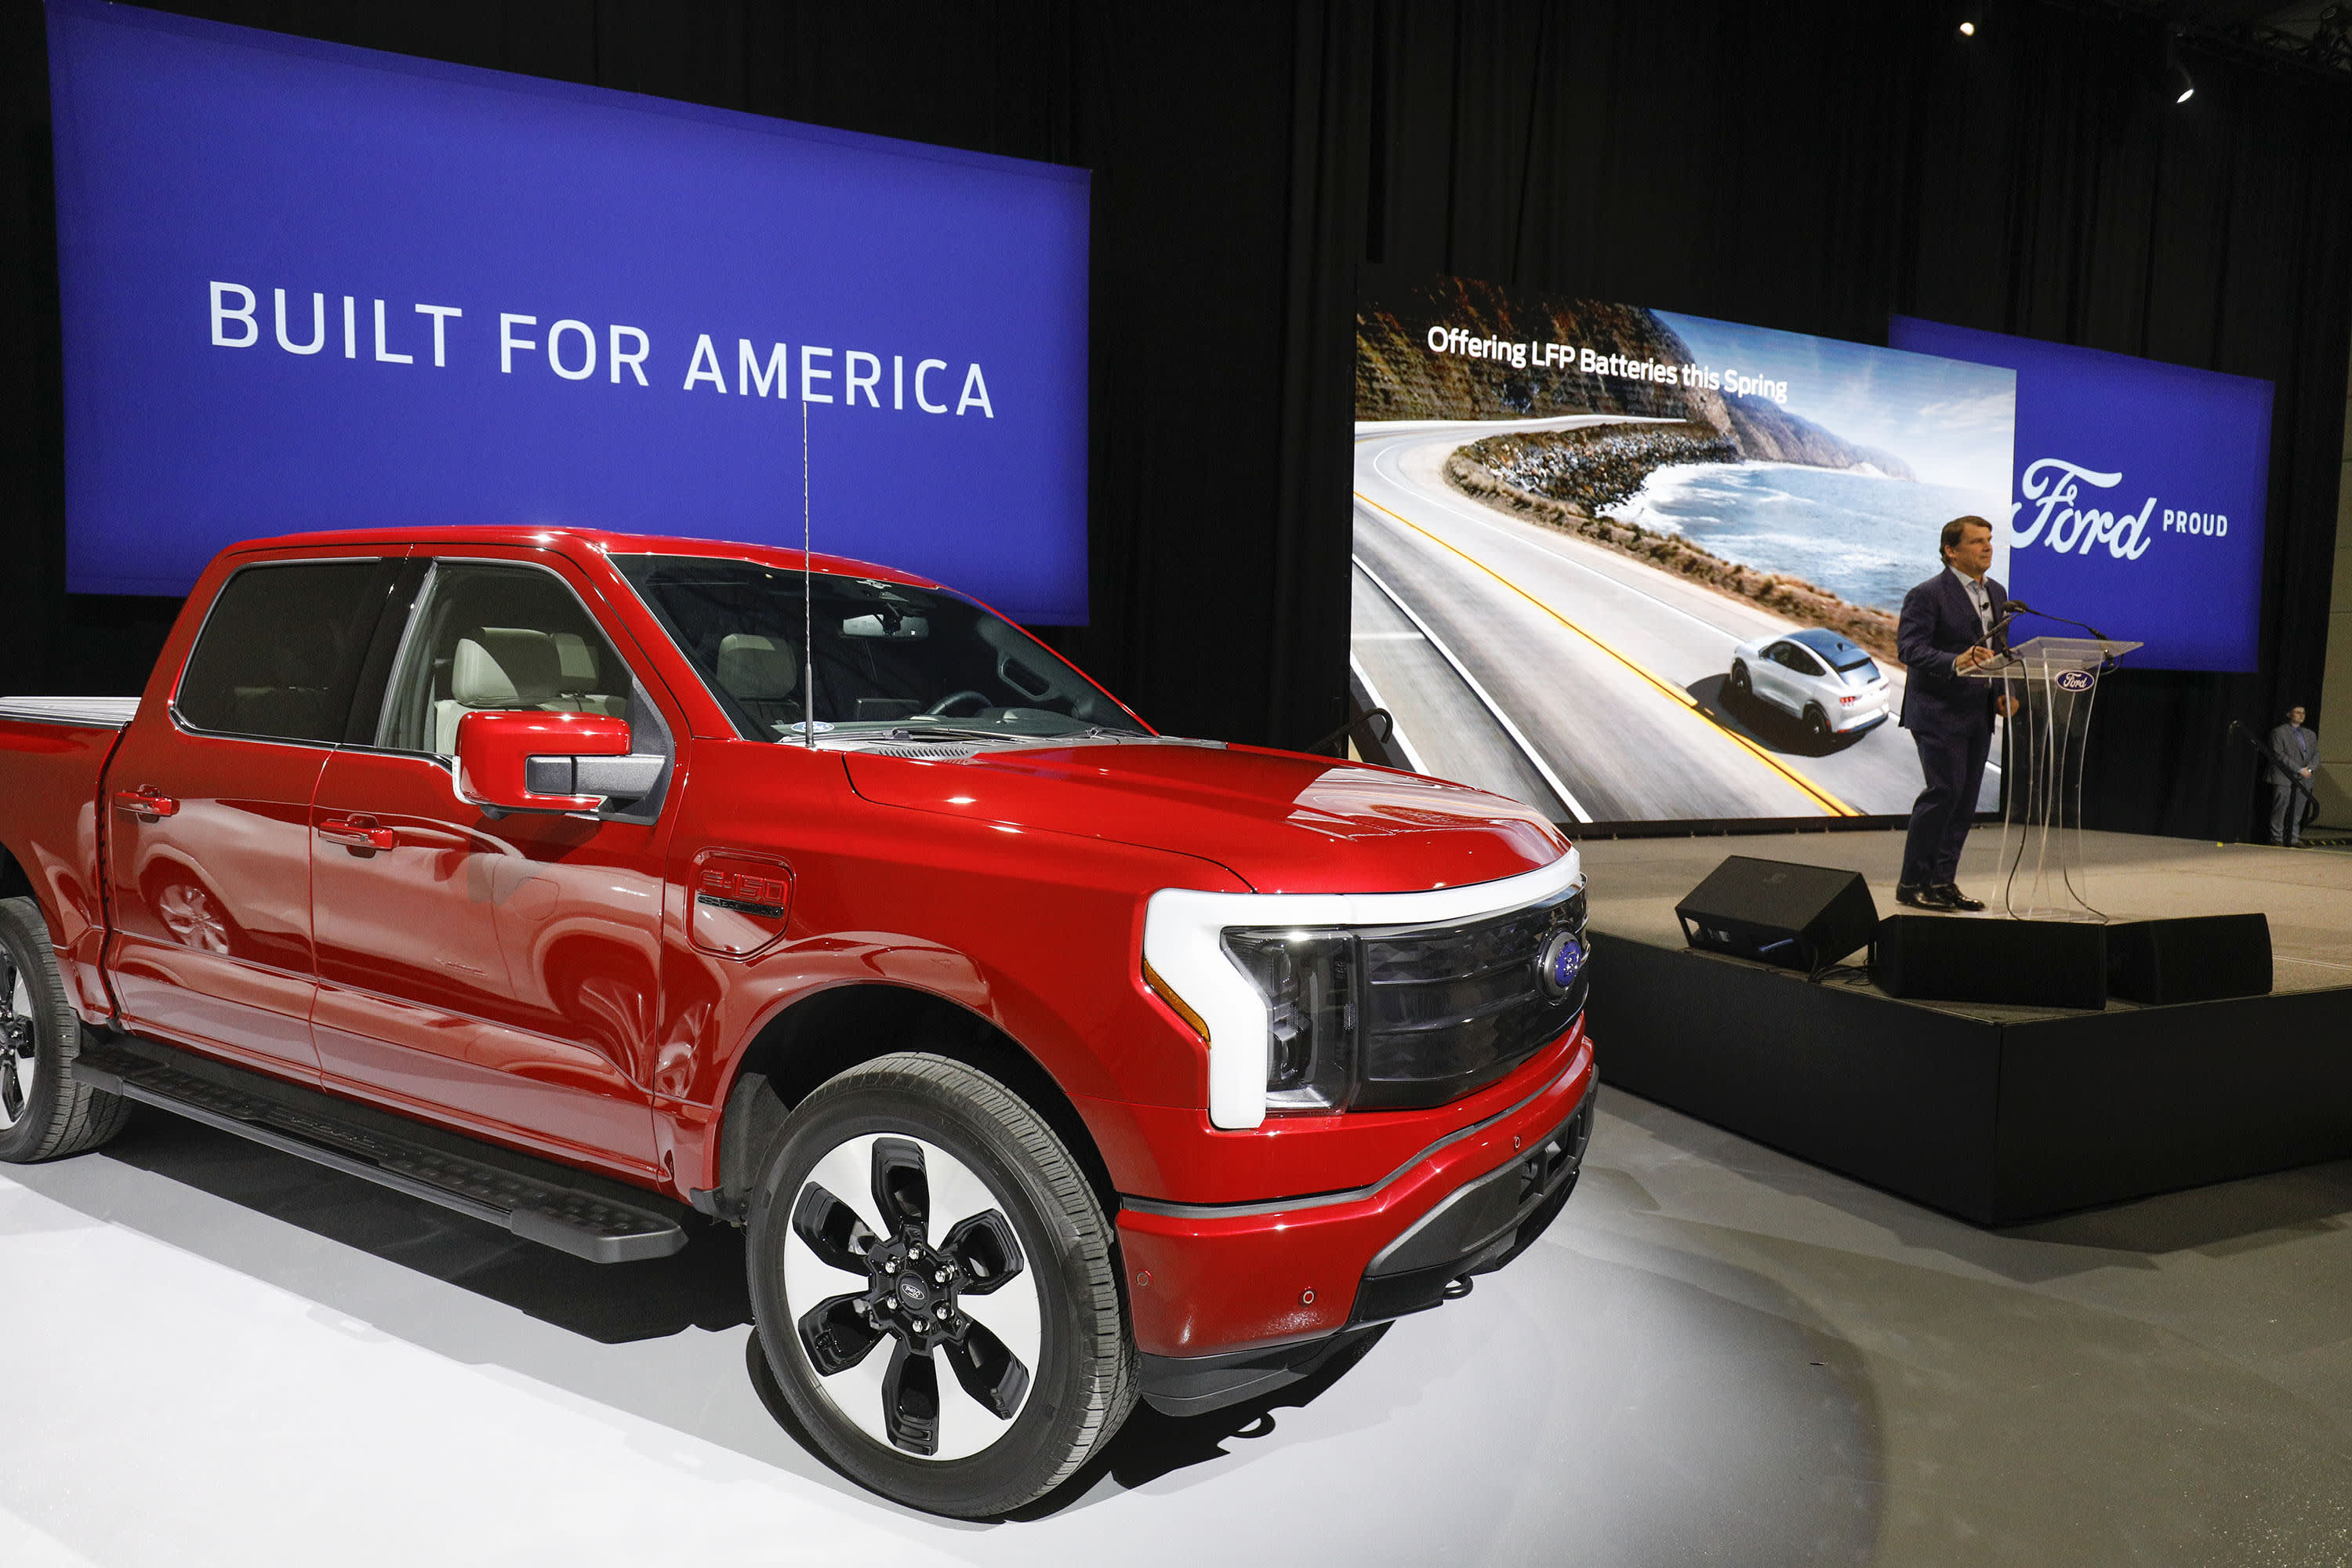 Ford is downsizing its electric vehicle battery plant in Michigan